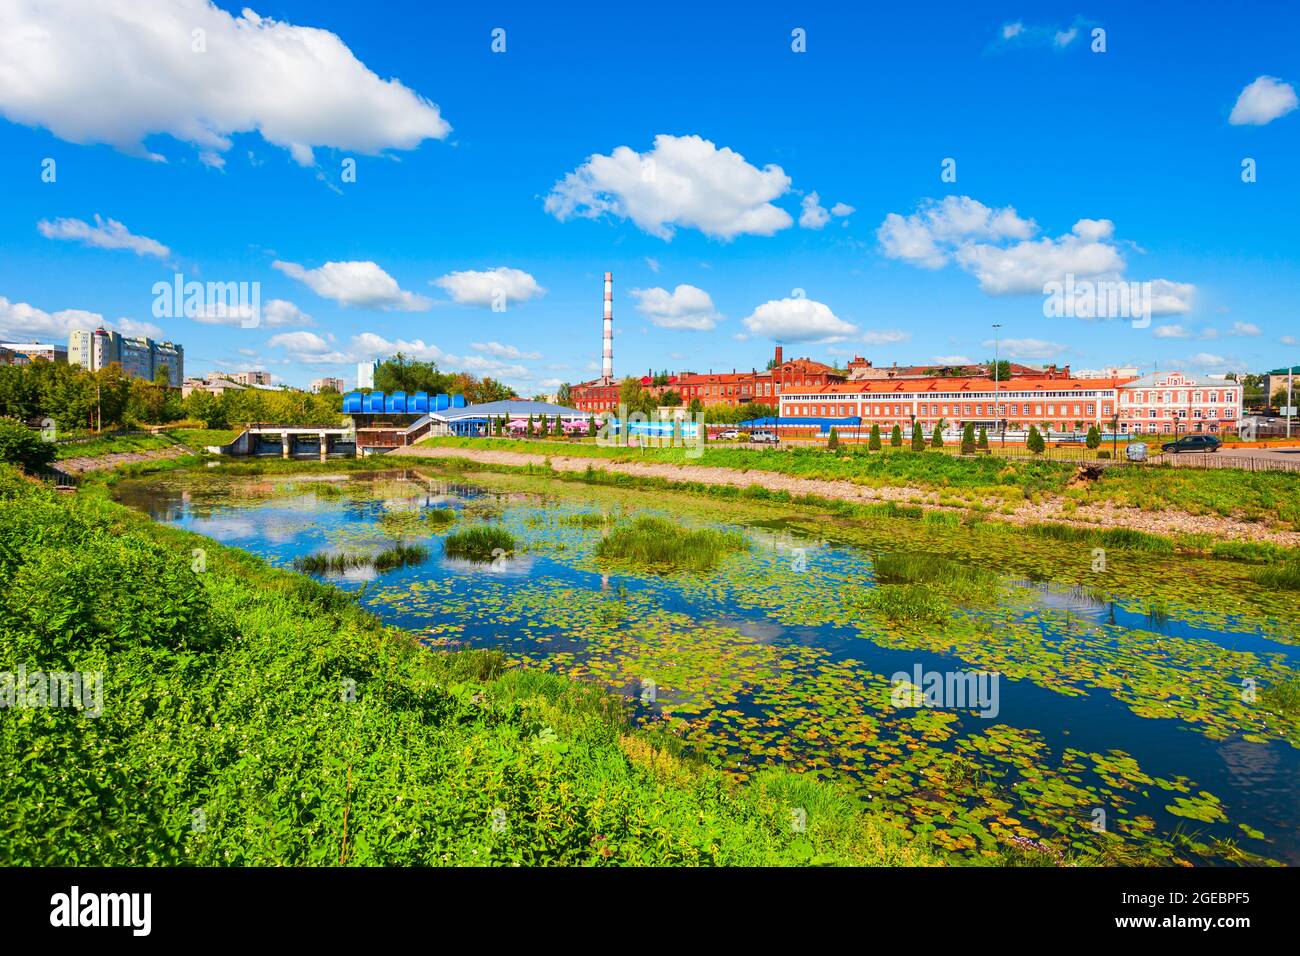 Ivanovo city centre is a part of Golden Ring of Russia Stock Photo